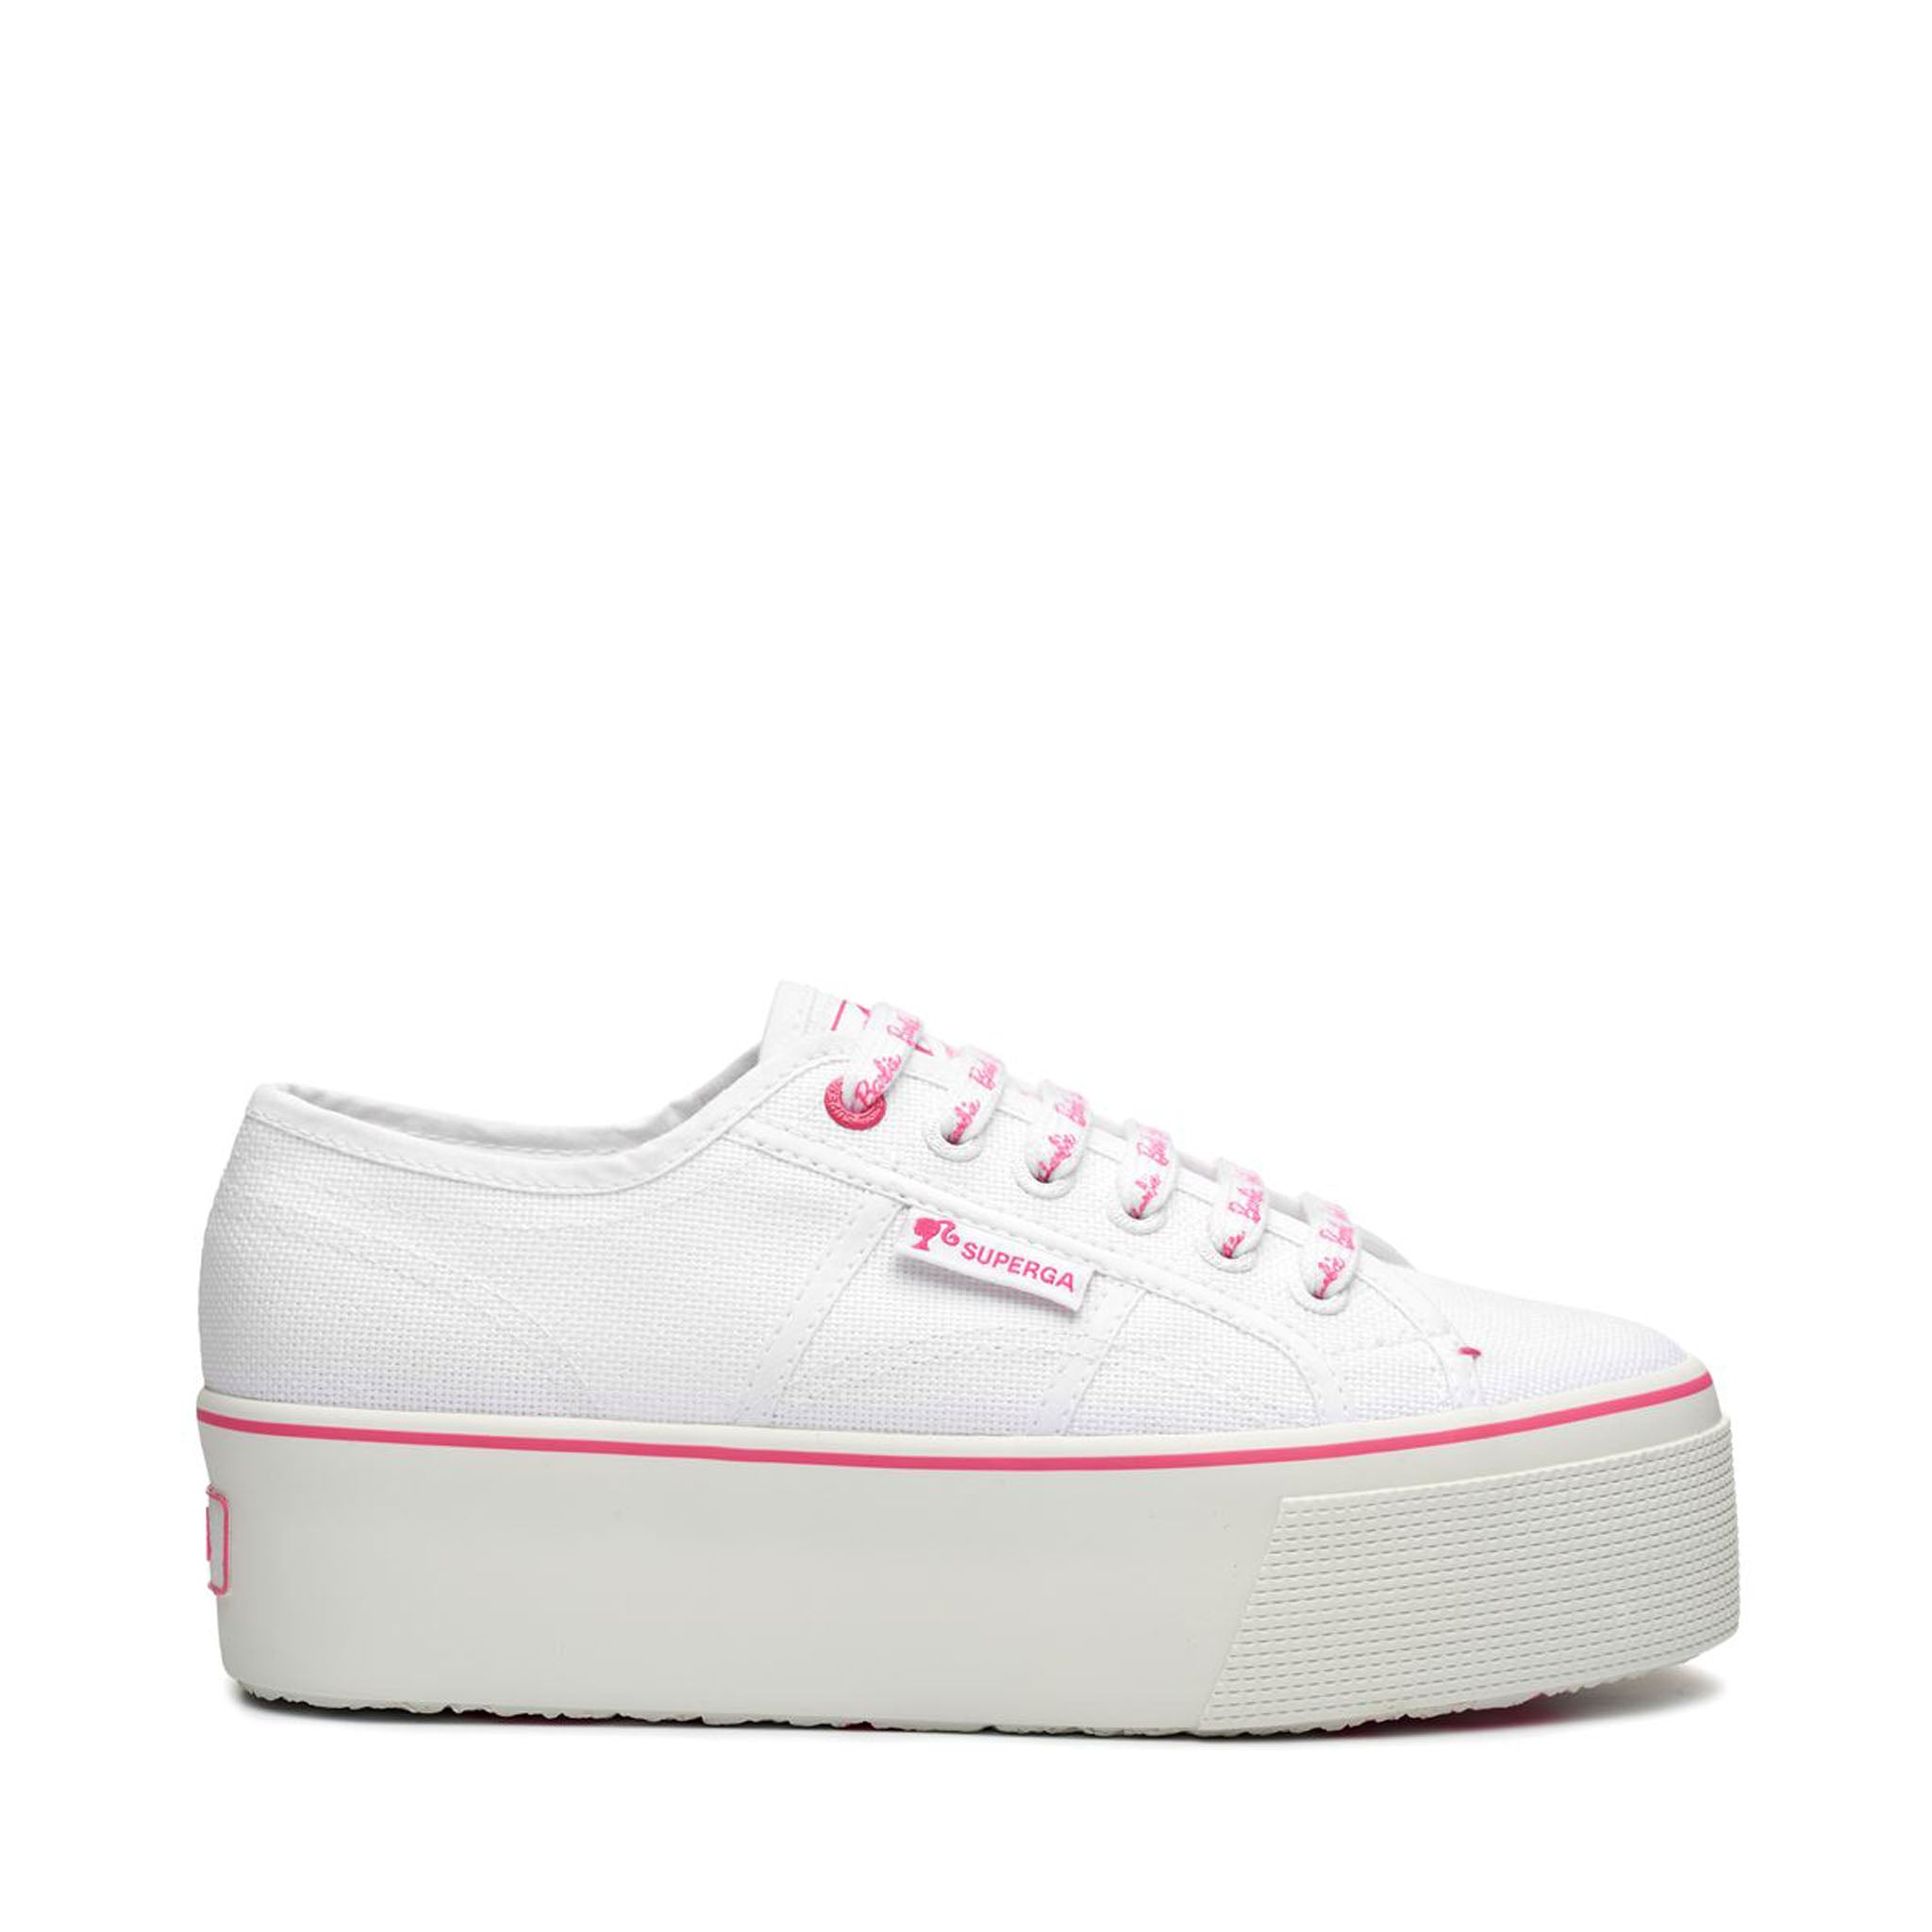 Superga 2790 Barbie Classic Sneakers. Side view.